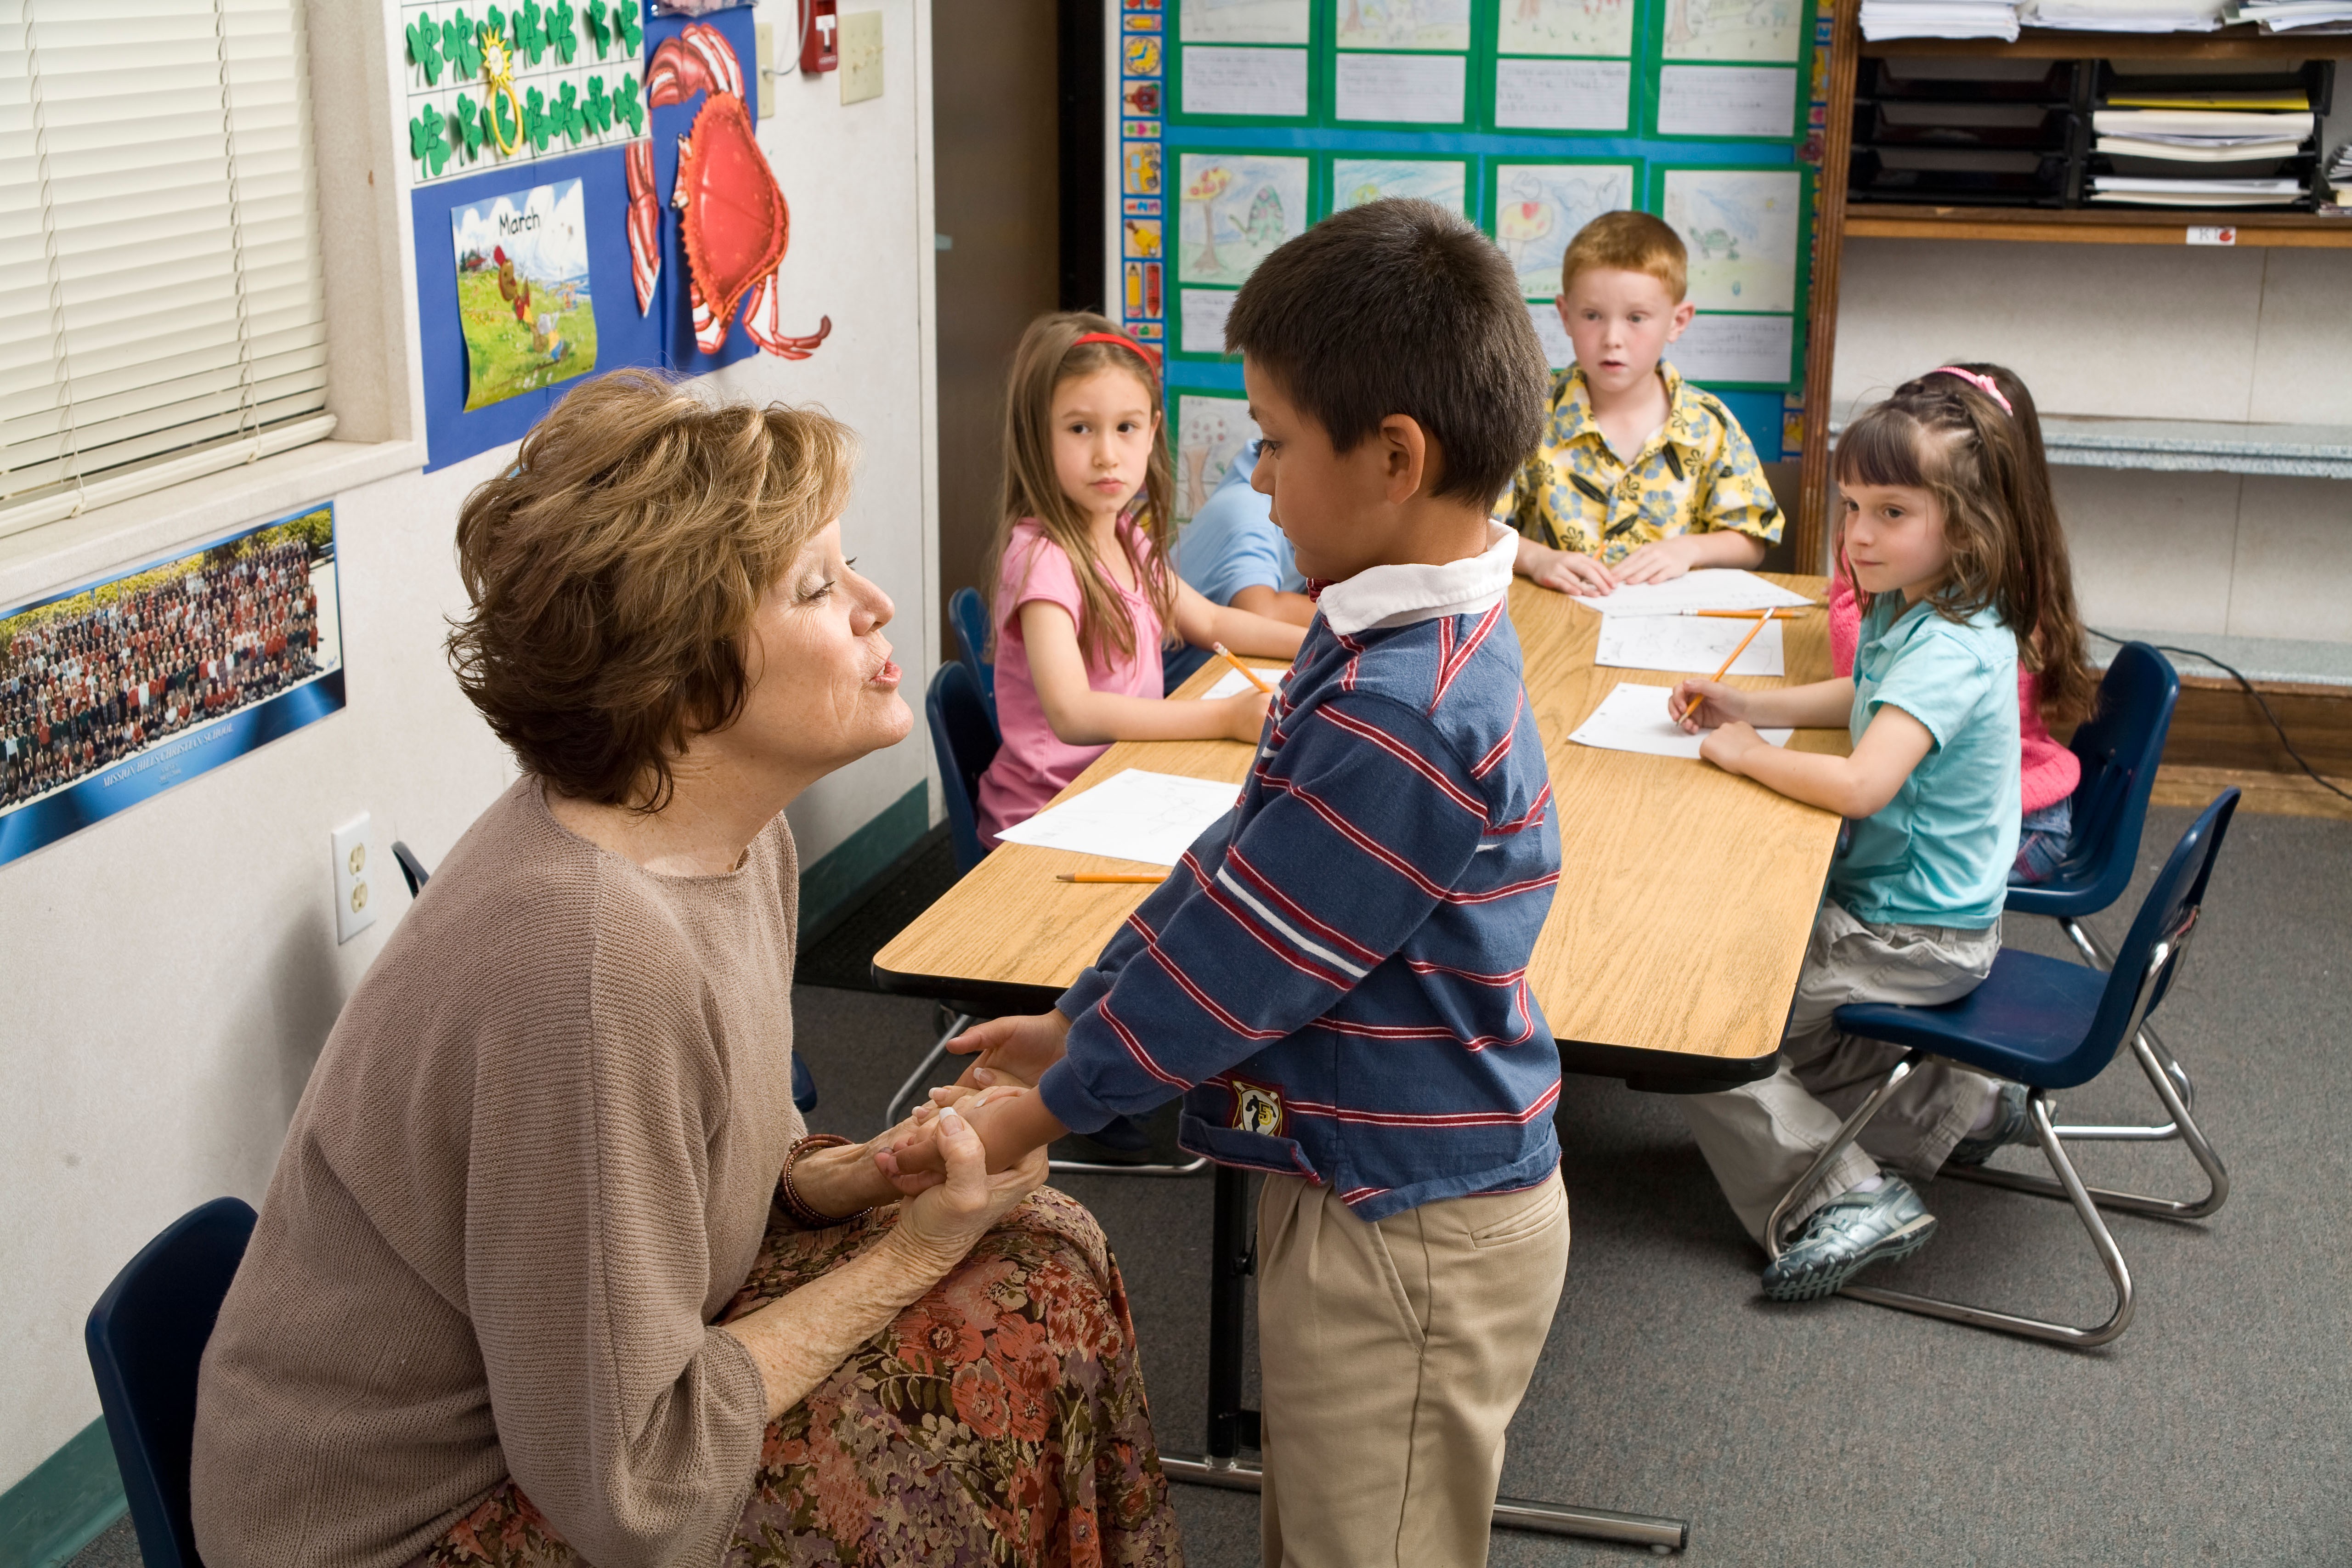 Standards of behaviour and codes of conduct vary from school to school. Photo: Alamy